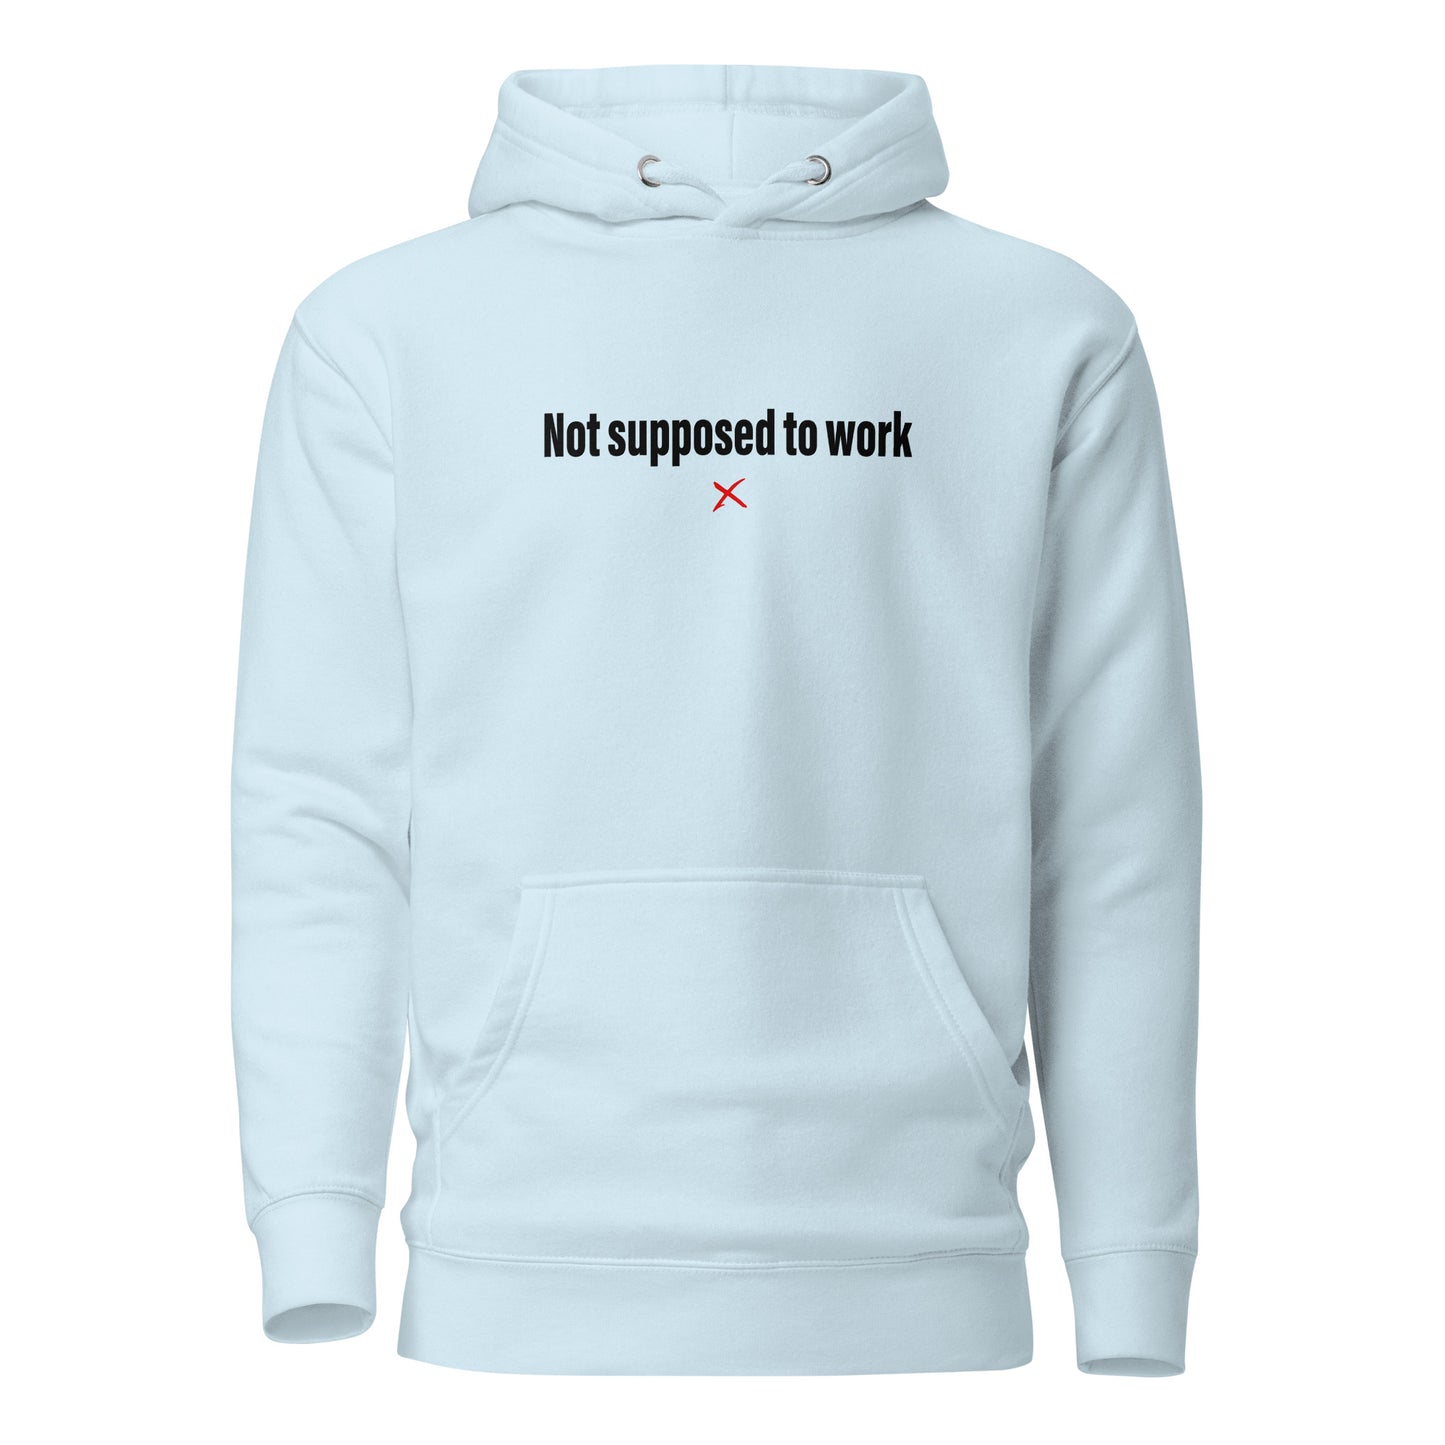 Not supposed to work - Hoodie